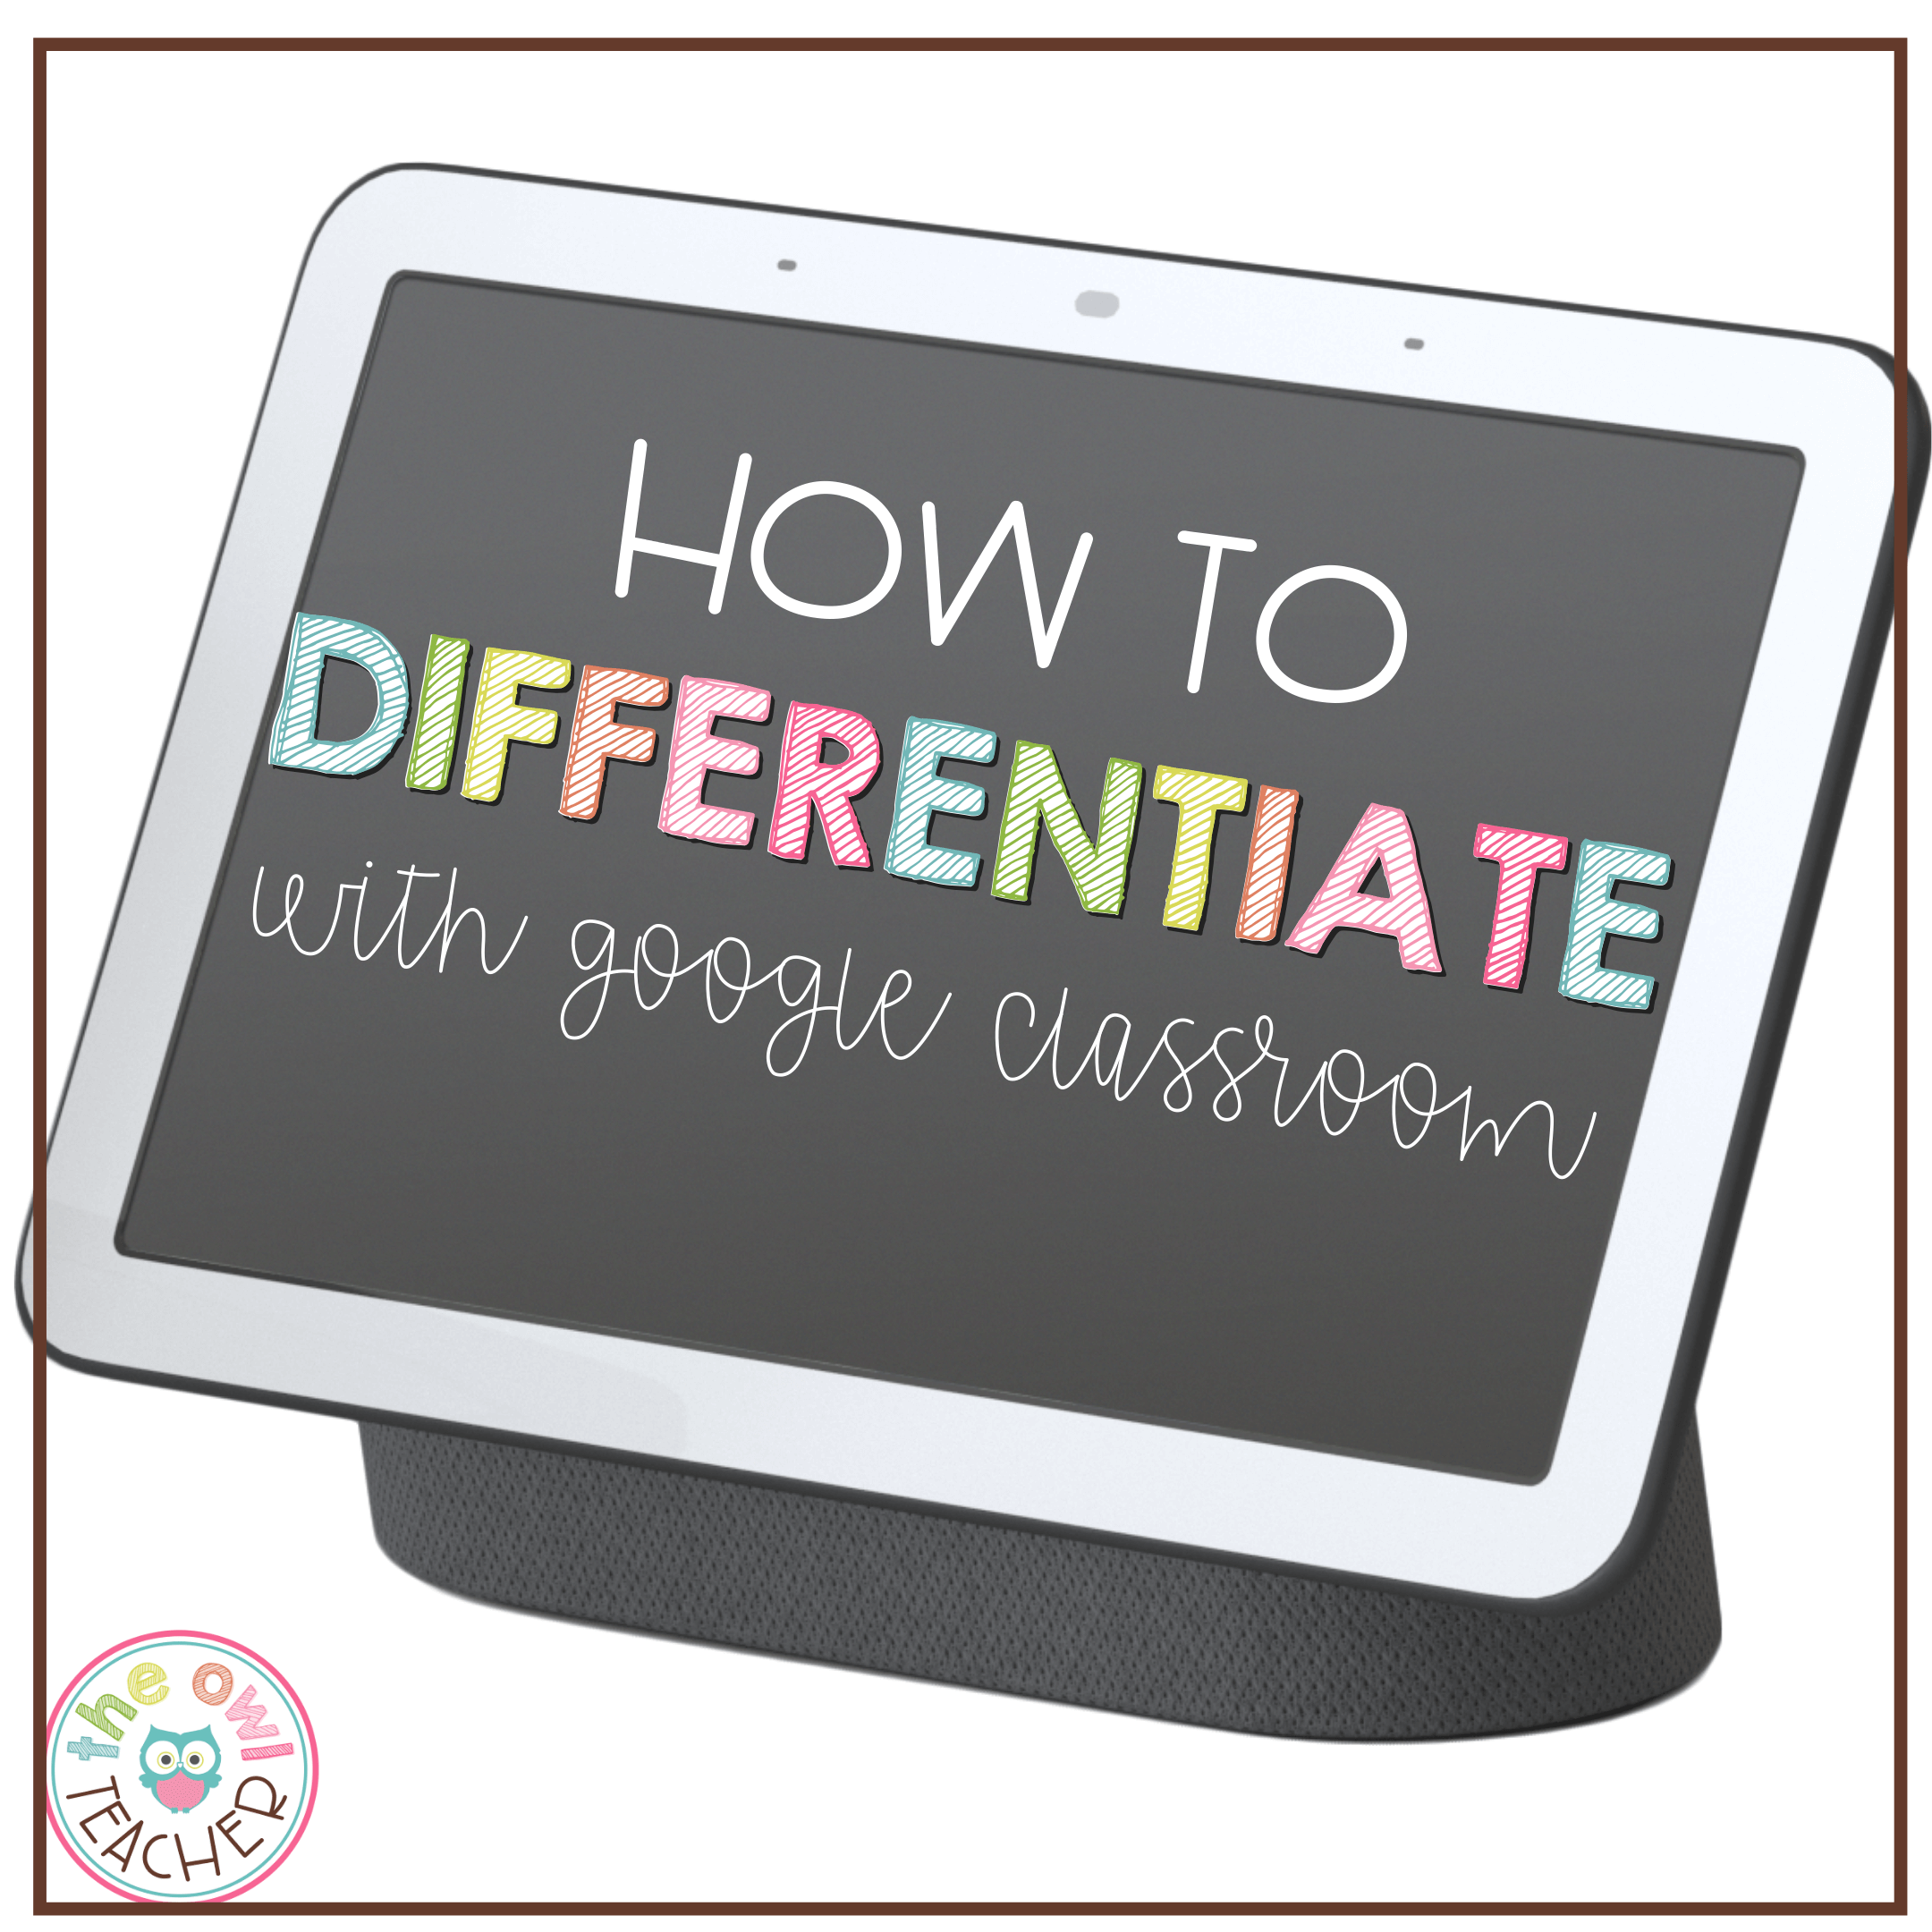 If you are looking to differentiate with google classroom, you have come to the right place. This post walks you through how to use differentiation during distance learning and with the most powerful online classroom system!